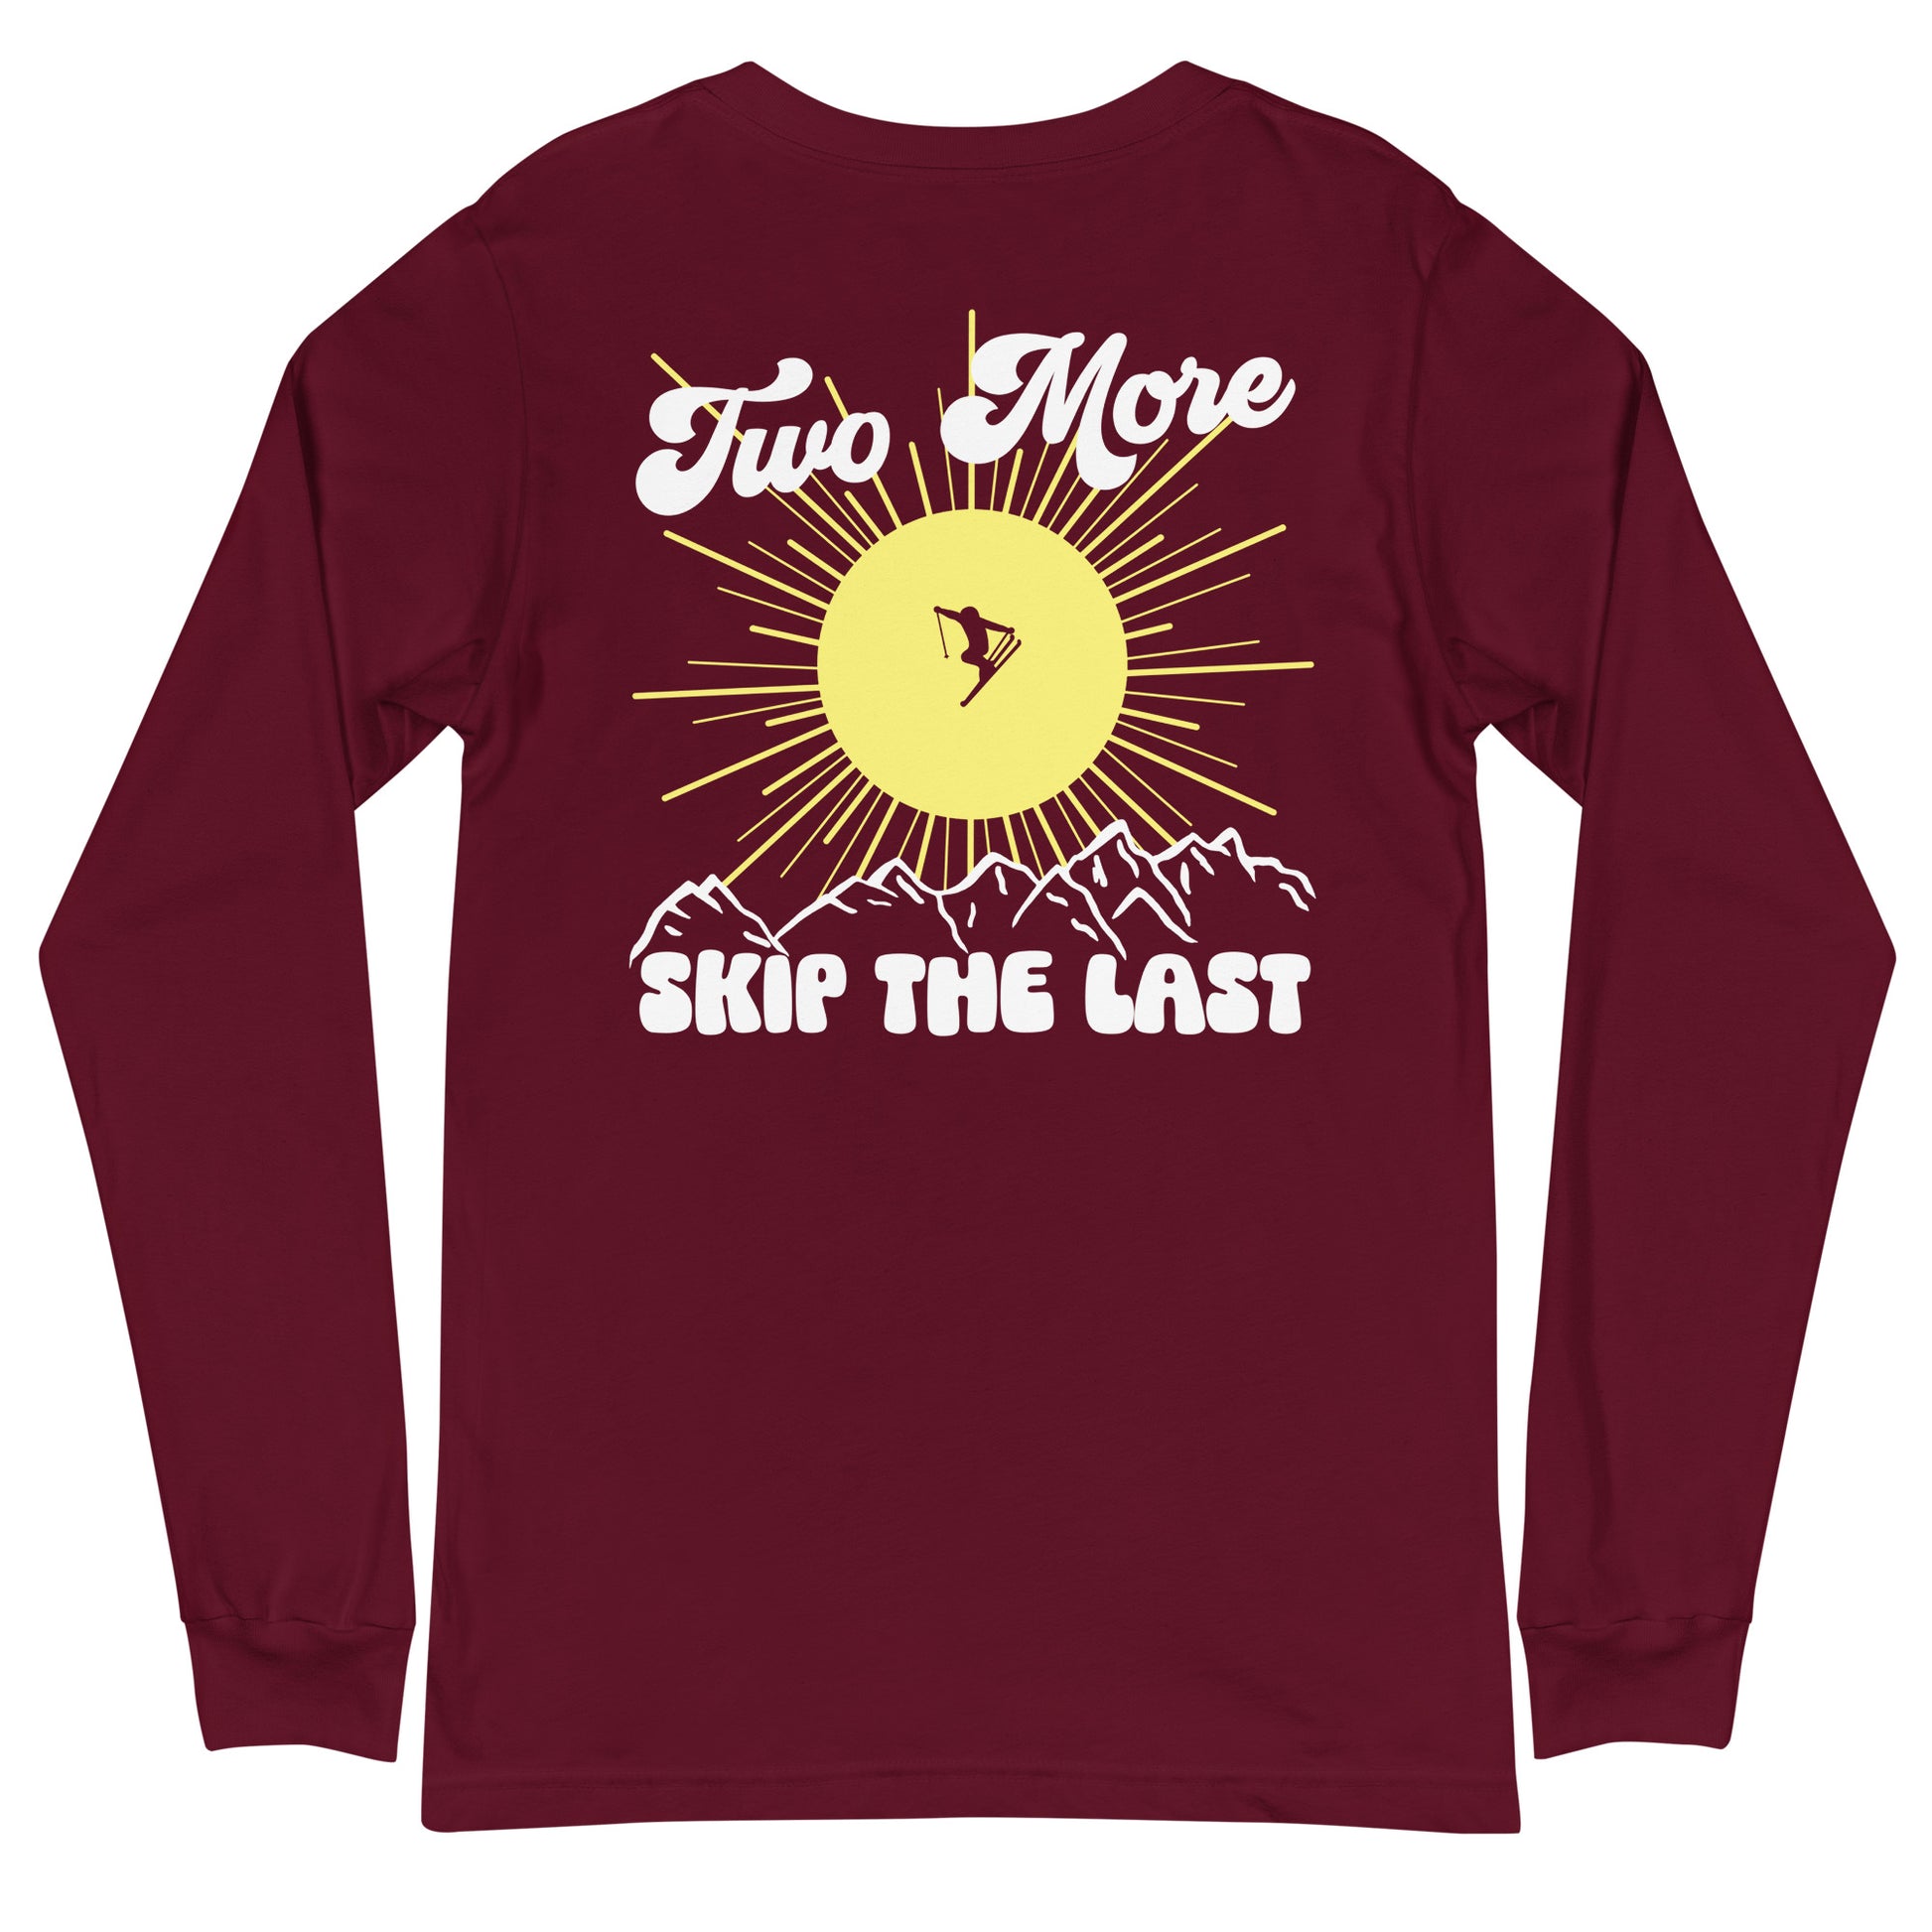 Two More Skip The Last "Bluebird" maroon unisex Long sleeve t-shirt. Back view